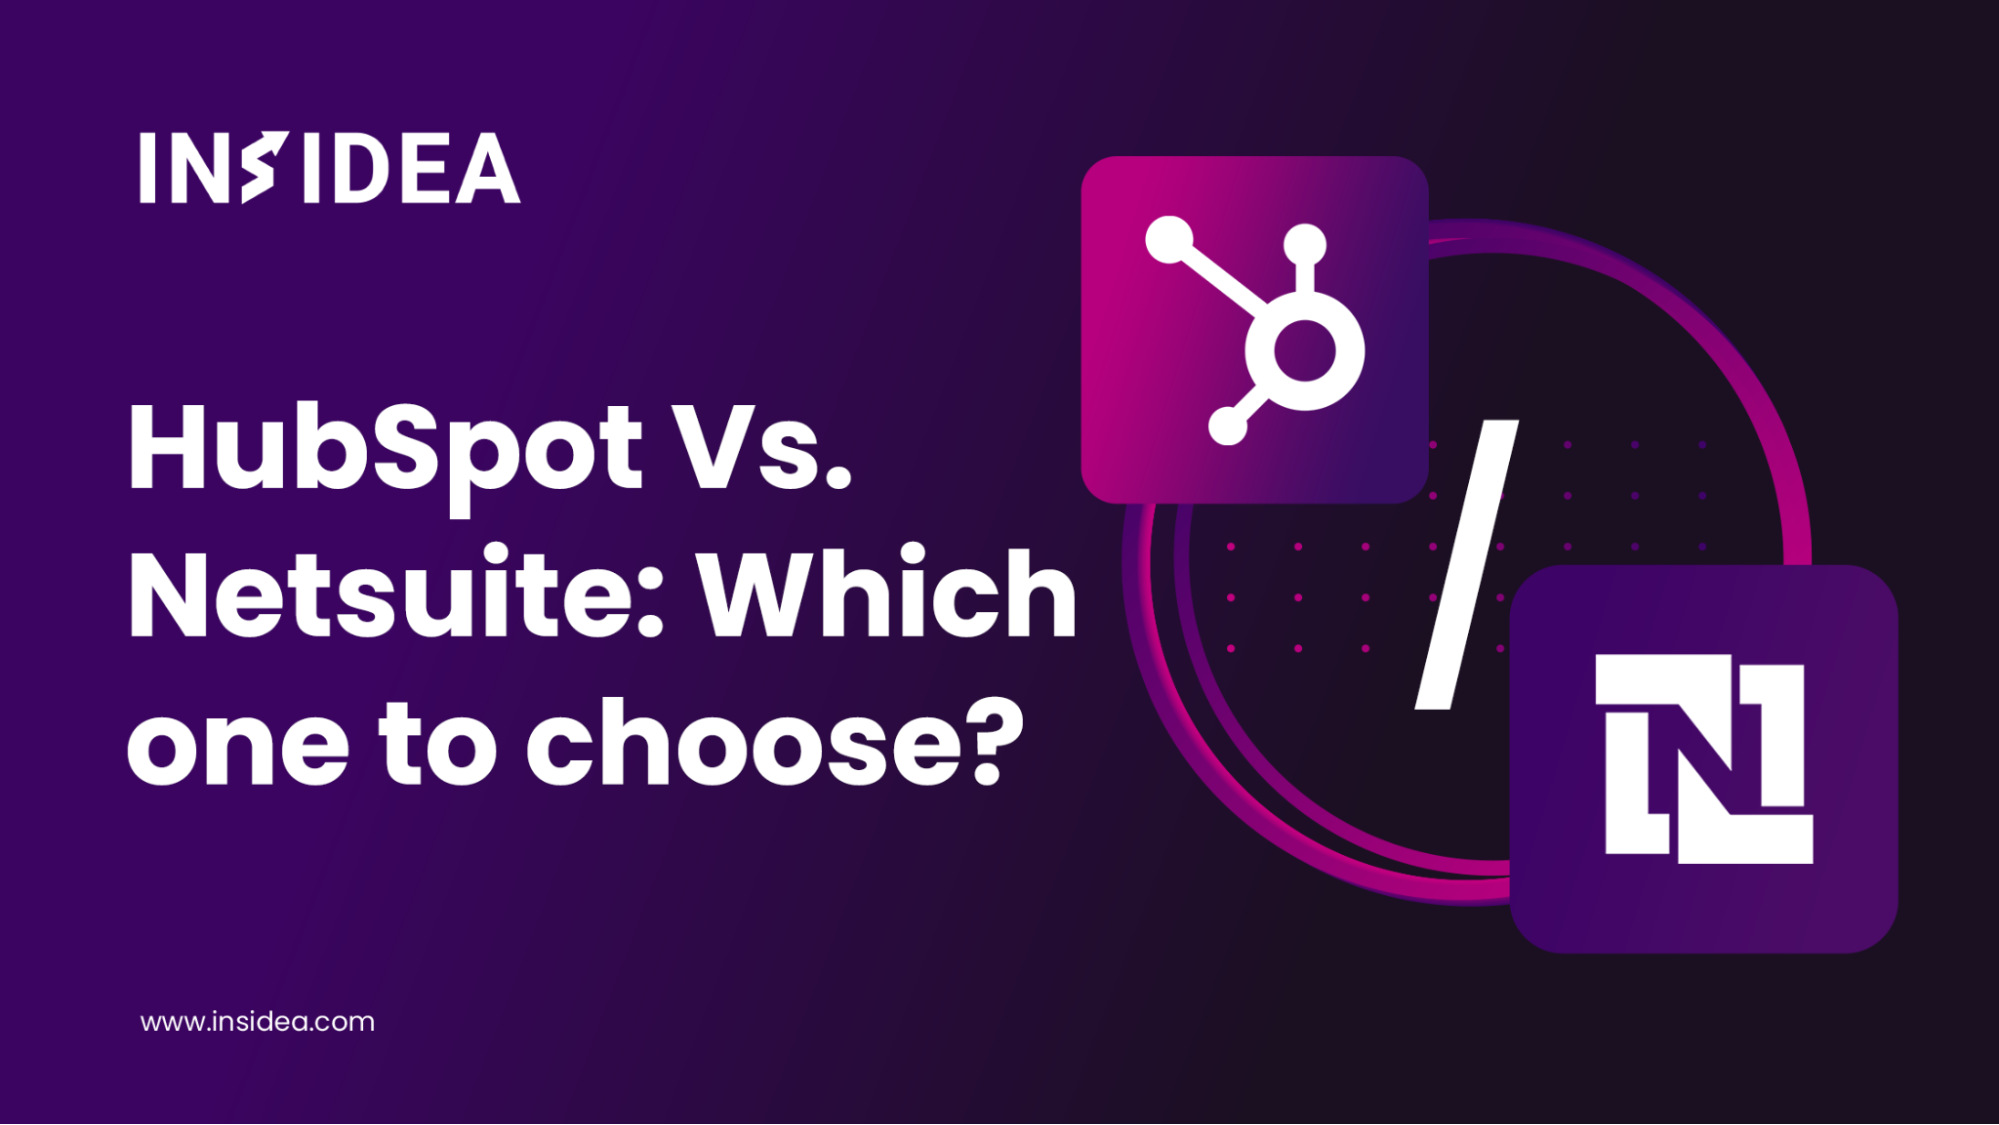 HubSpot Vs. Netsuite: Which one to choose?